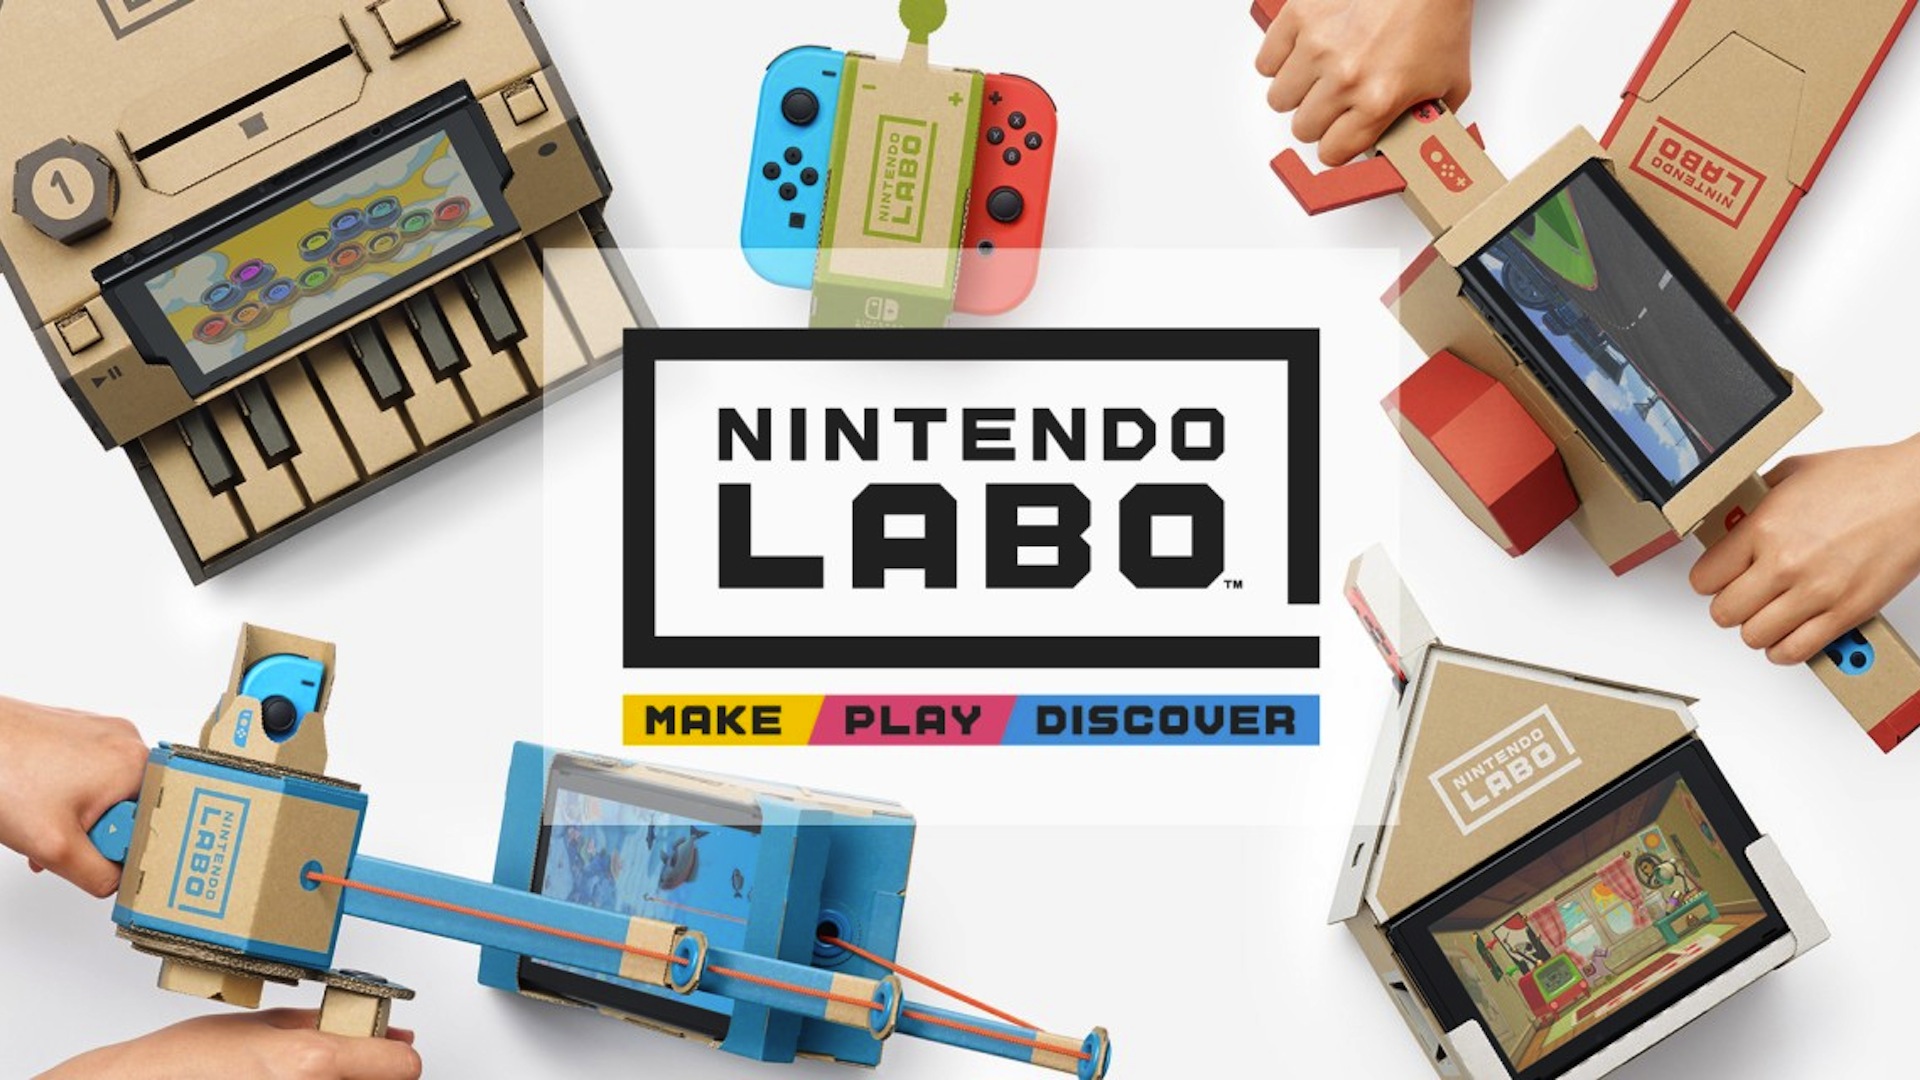 Nintendo Labo logo above the variety kit of carboard items